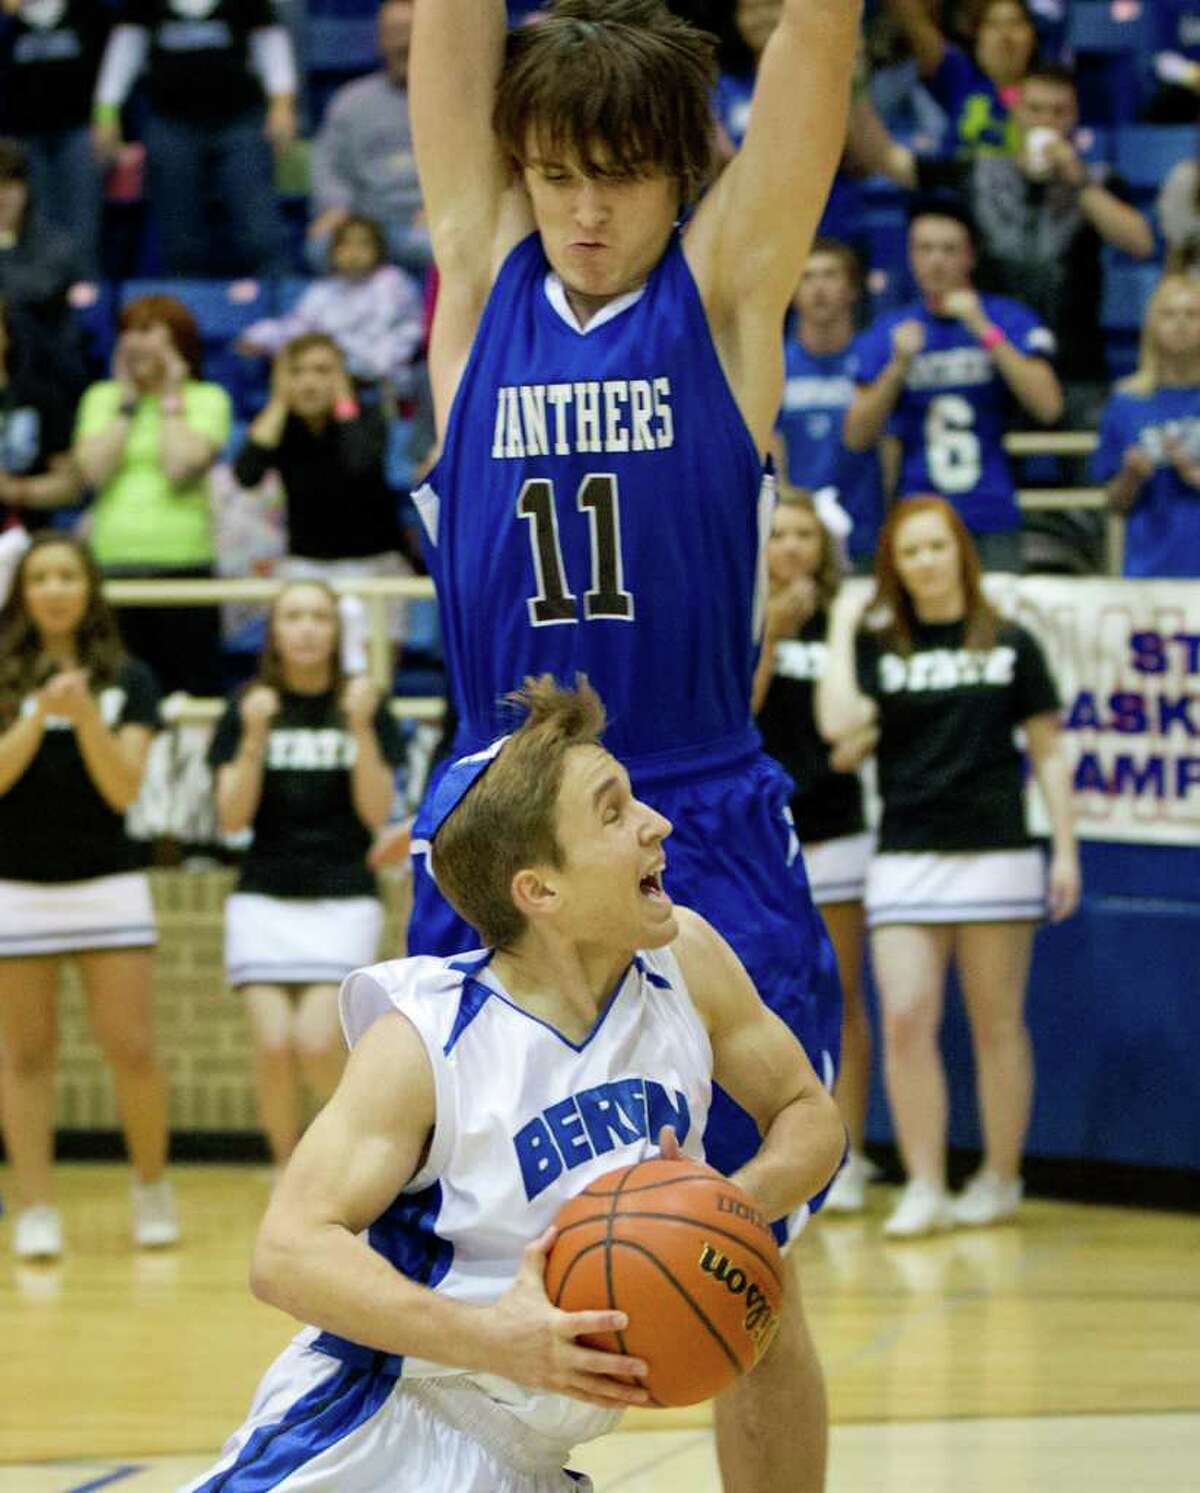 Beren Academy guard Isaac Mirwis (13) looks for an opening against Abilene Christian's Clint Bruton.